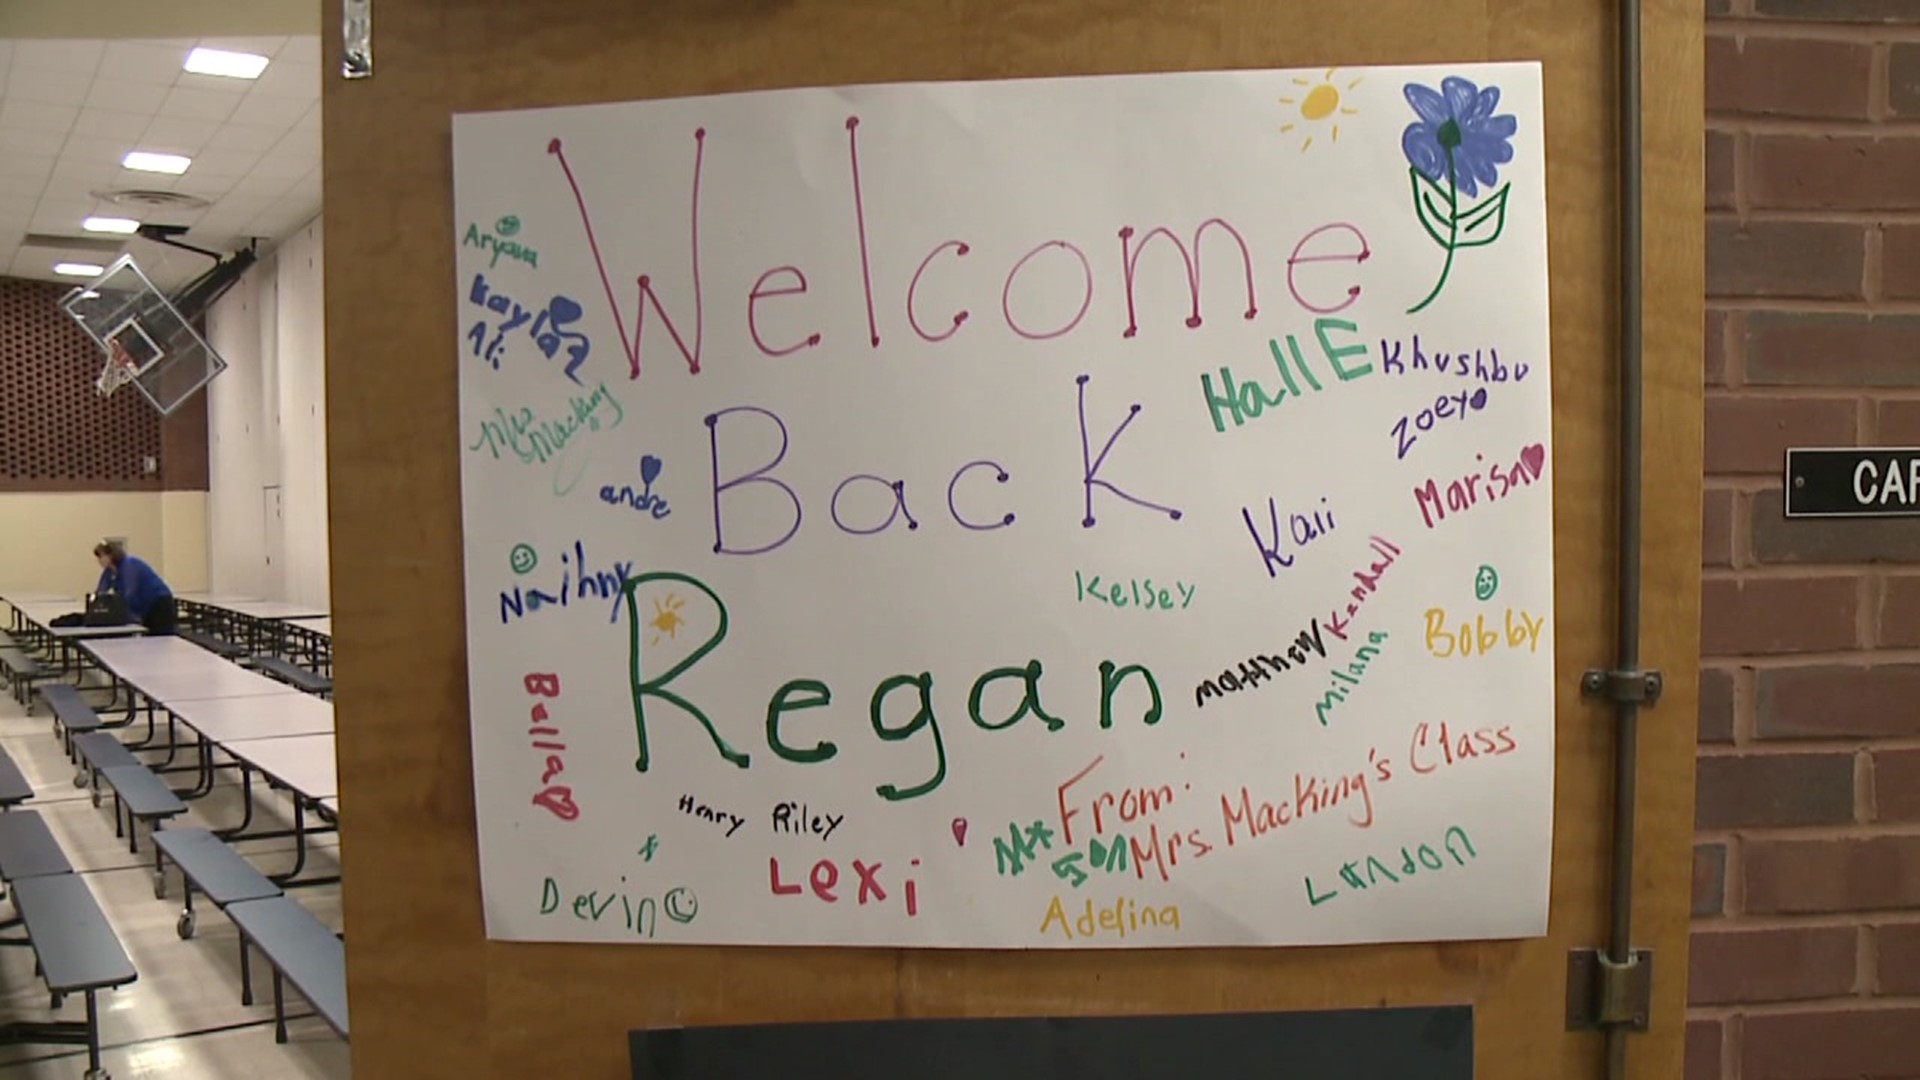 Students celebrated in thoughtful ways for a third grader's return to the classroom.